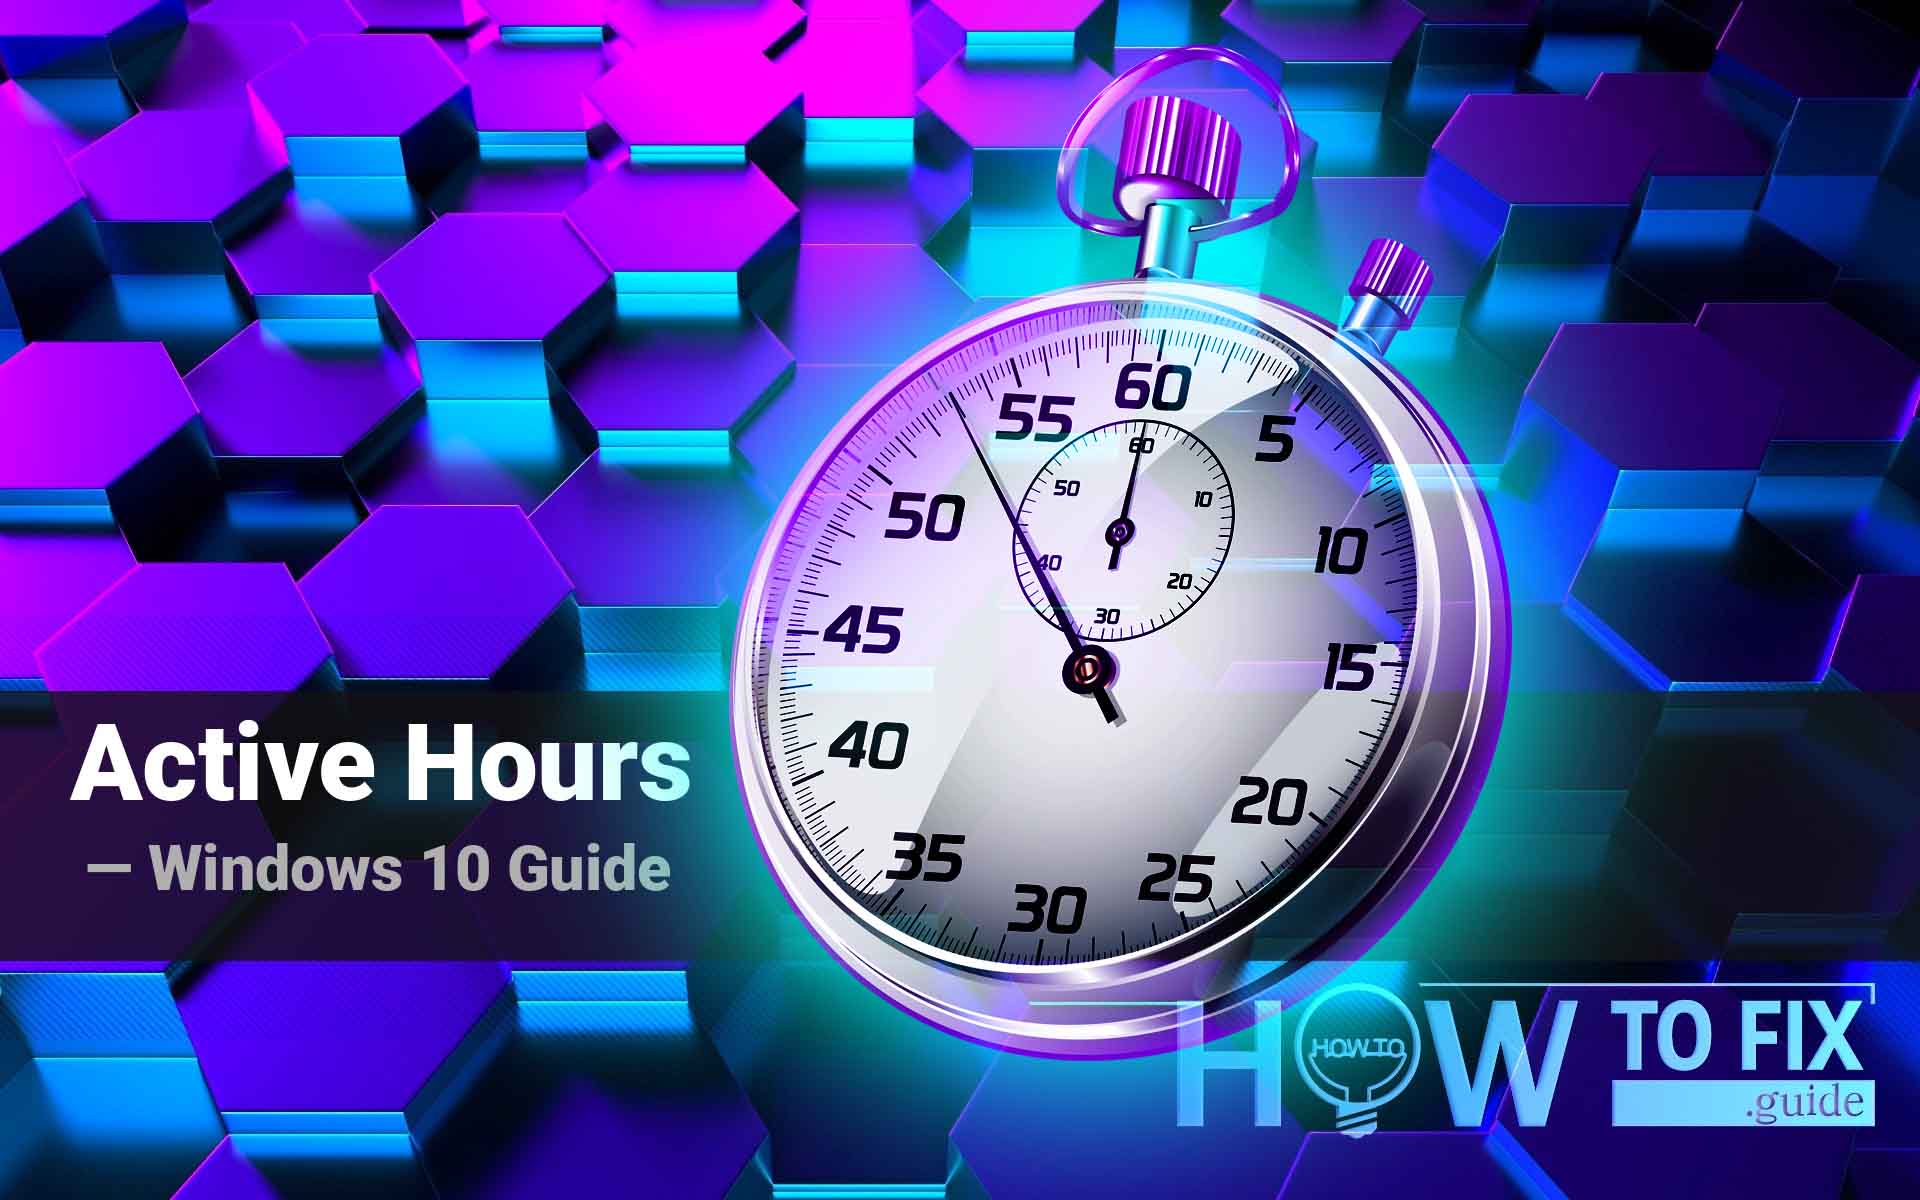 Active Hours: Windows 10 guide